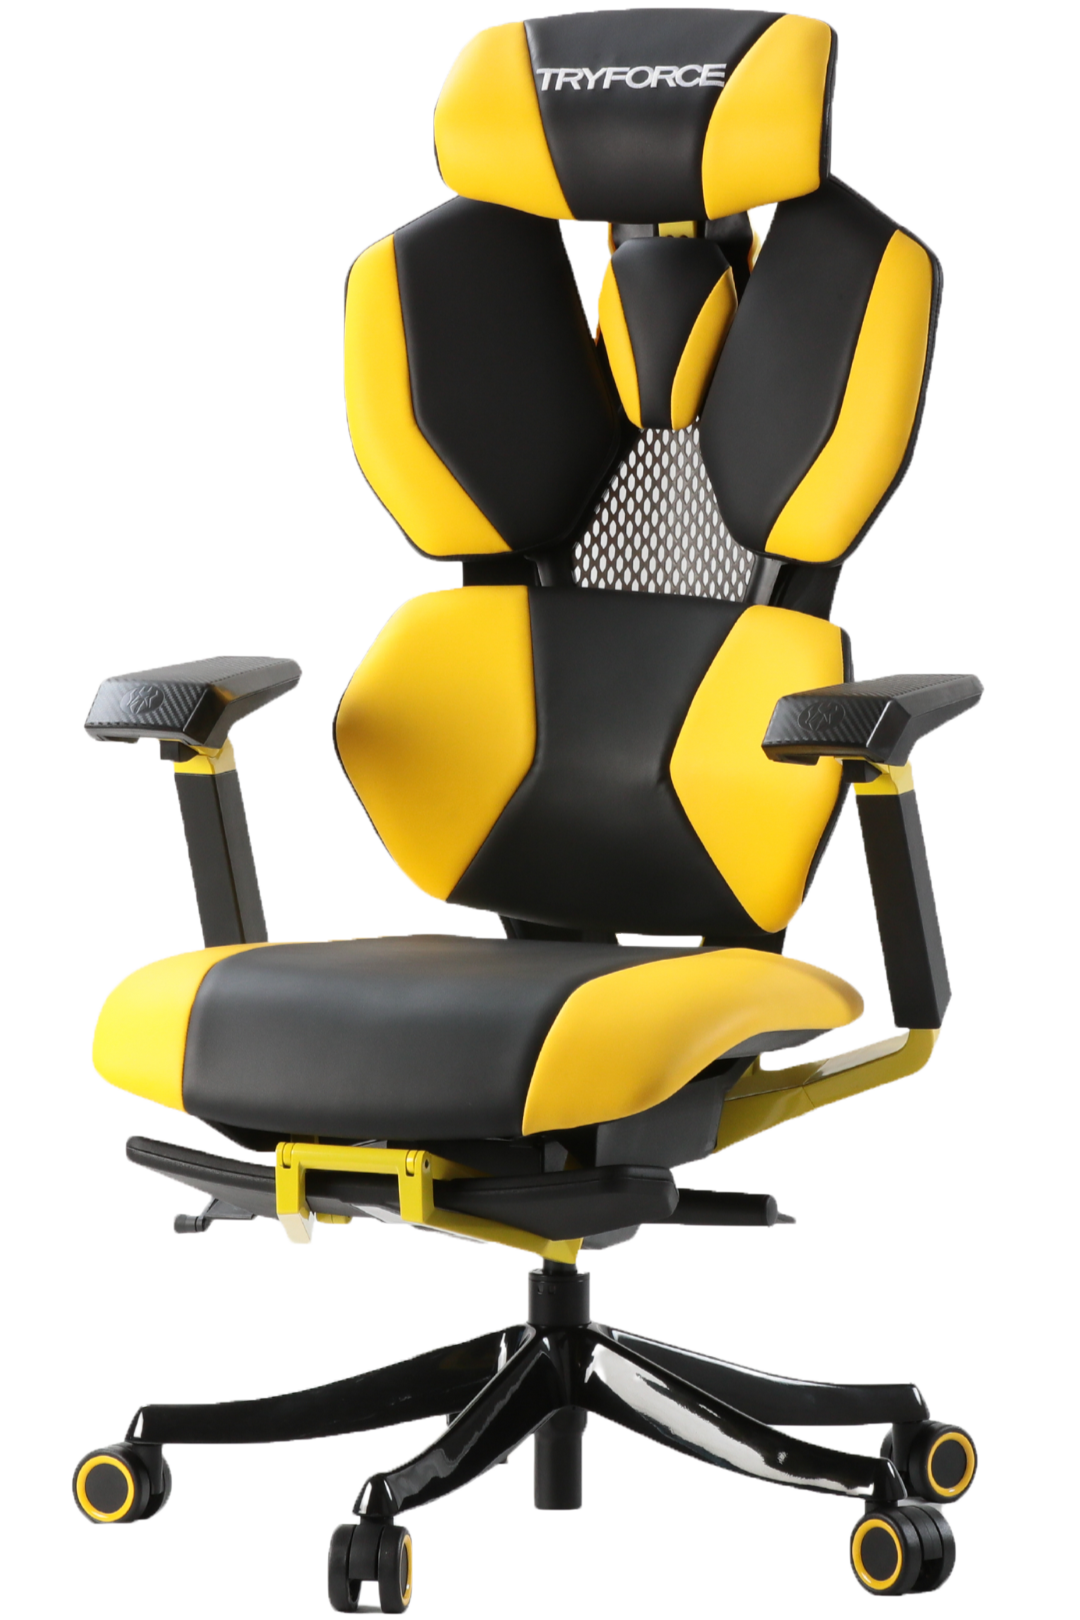 TRYFORCE Gaming CHAIR イエロー